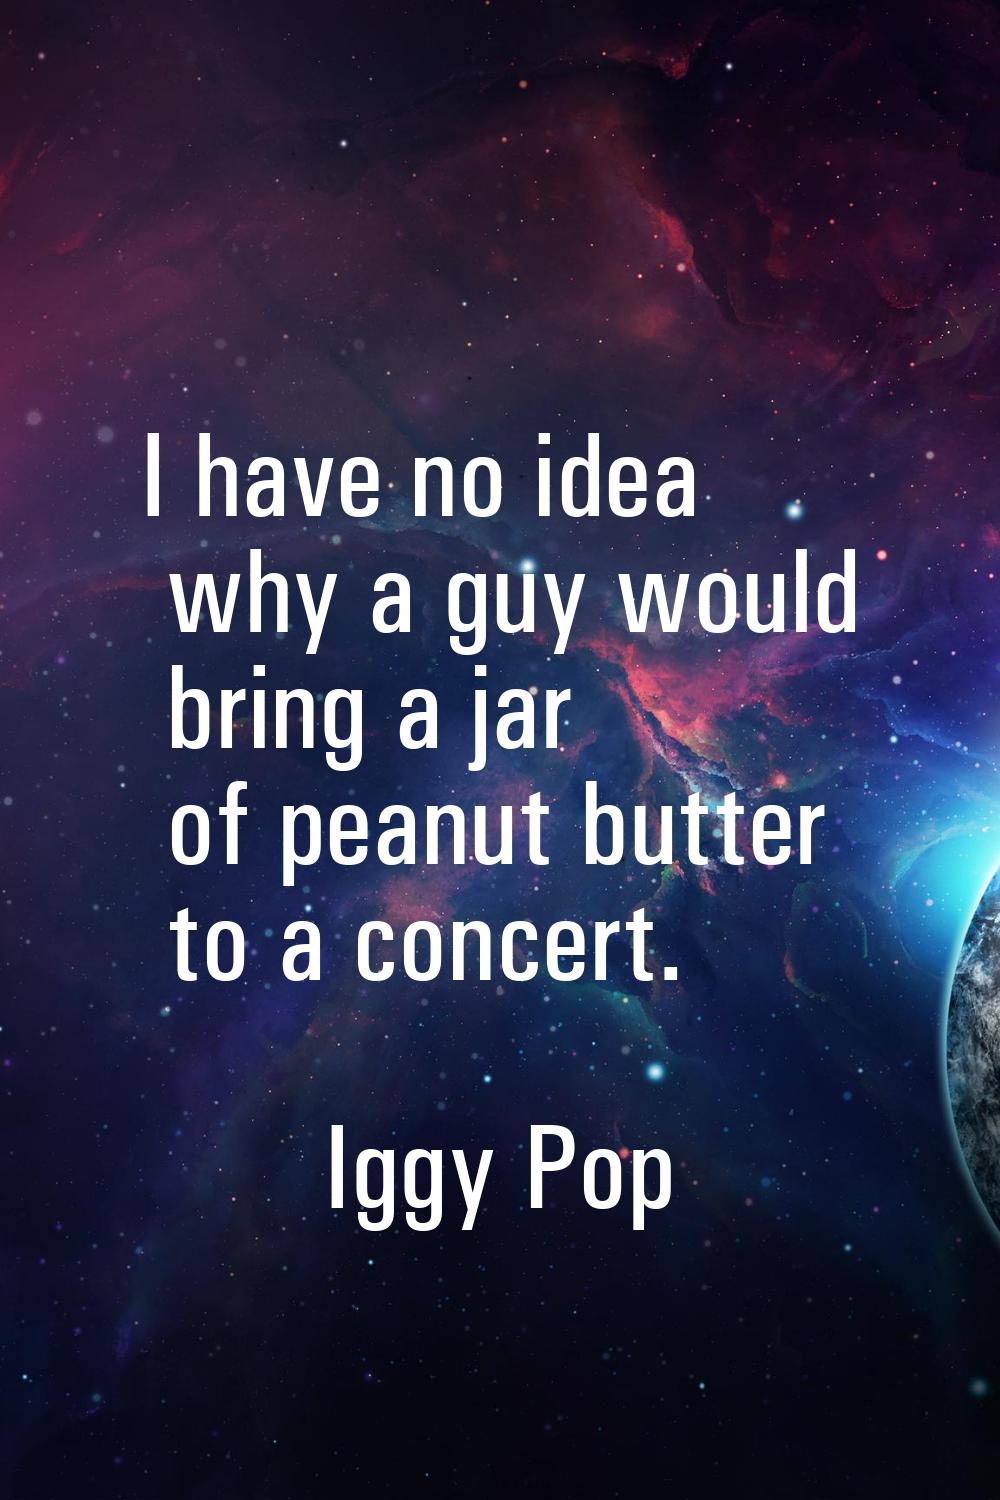 I have no idea why a guy would bring a jar of peanut butter to a concert.